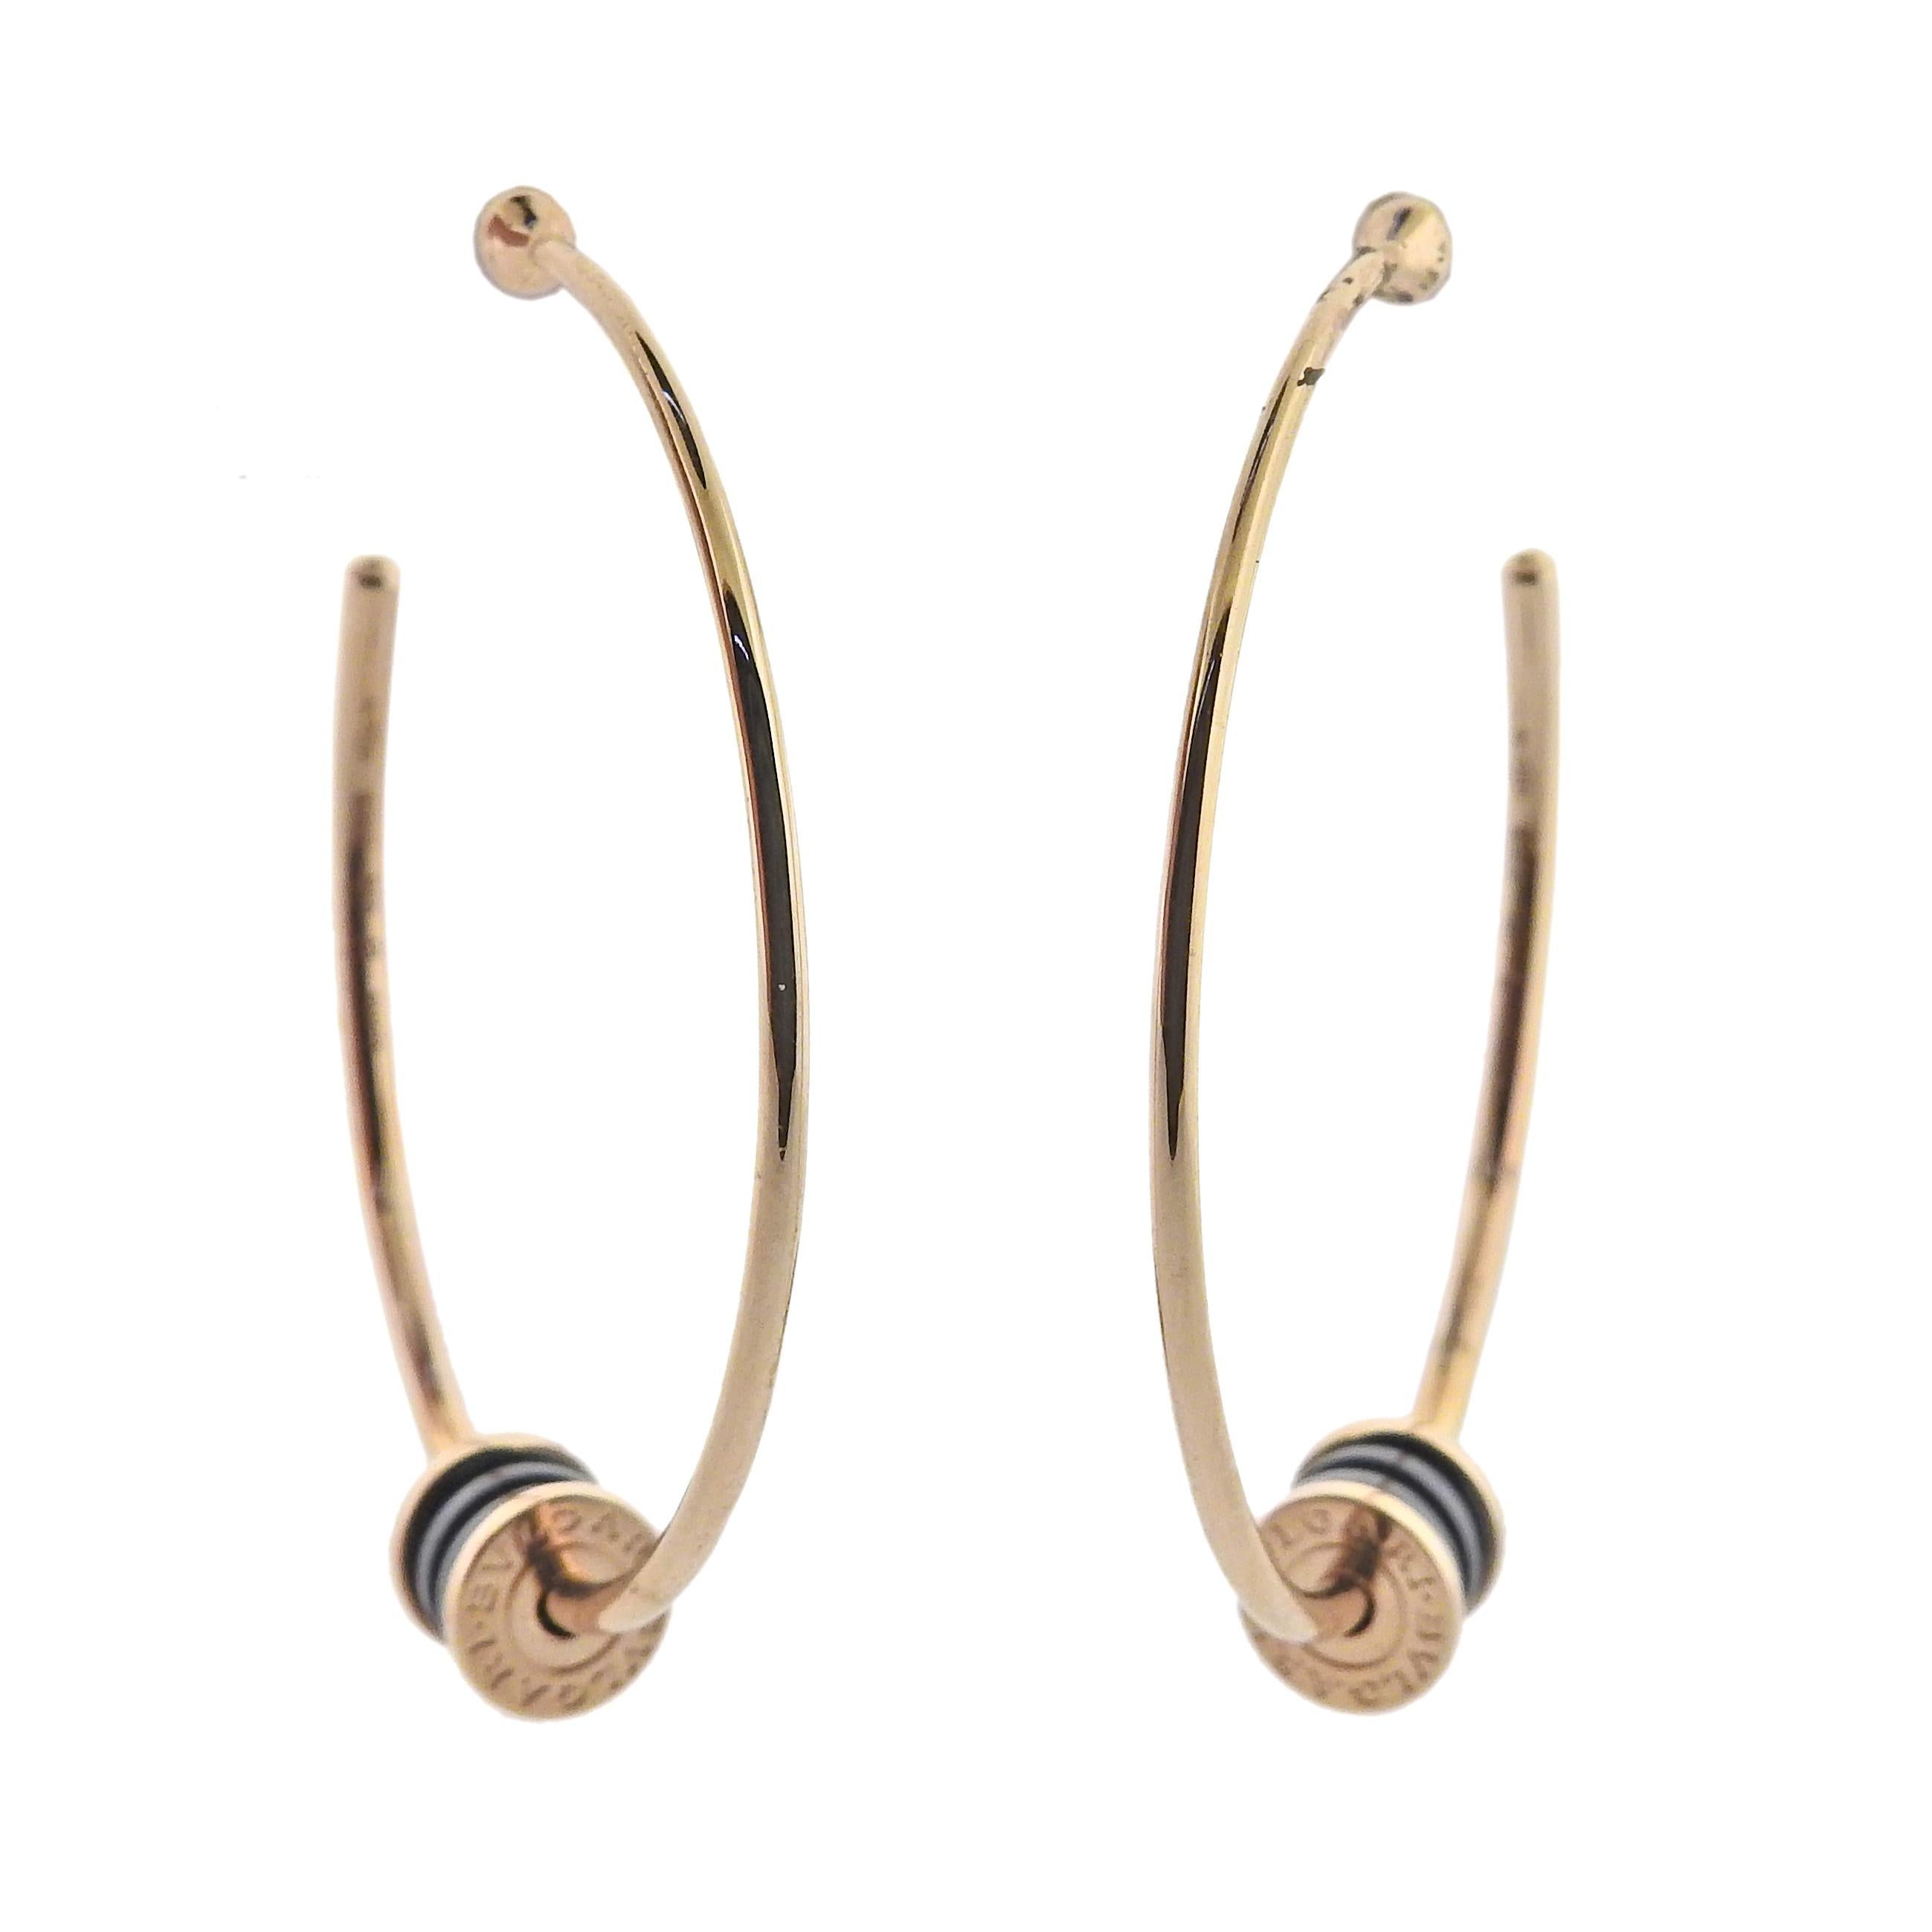 18k rose gold hoop B.Zero1 earrings by Bvlgari, with black ceramic. Retail $3050. Comes with COA and box. Earrings are 42mm in diameter, charm is 8mm x 7mm. Marked Bvlgari, made in Italy, Italian mark, 750, Serial number. Weight 10.1 grams